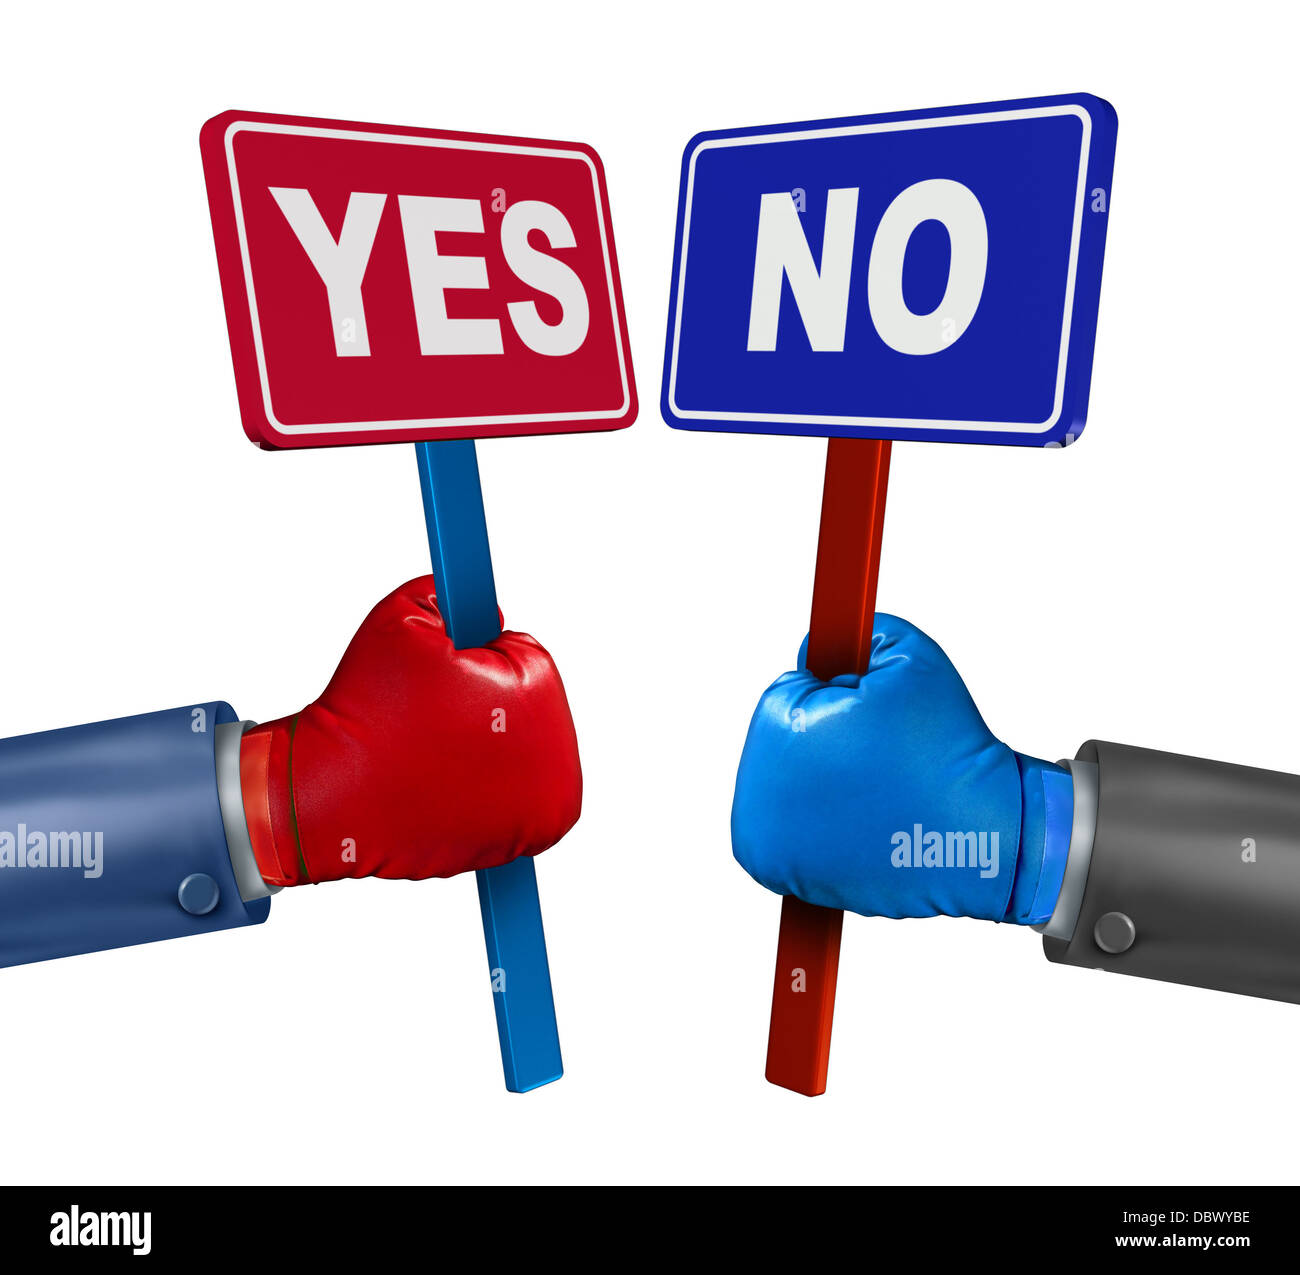 Vote conflict concept as a competition between two opposing rivals wearing boxing gloves and holding yes or no signs fighting and campaigning to change opinions on a white background. Stock Photo